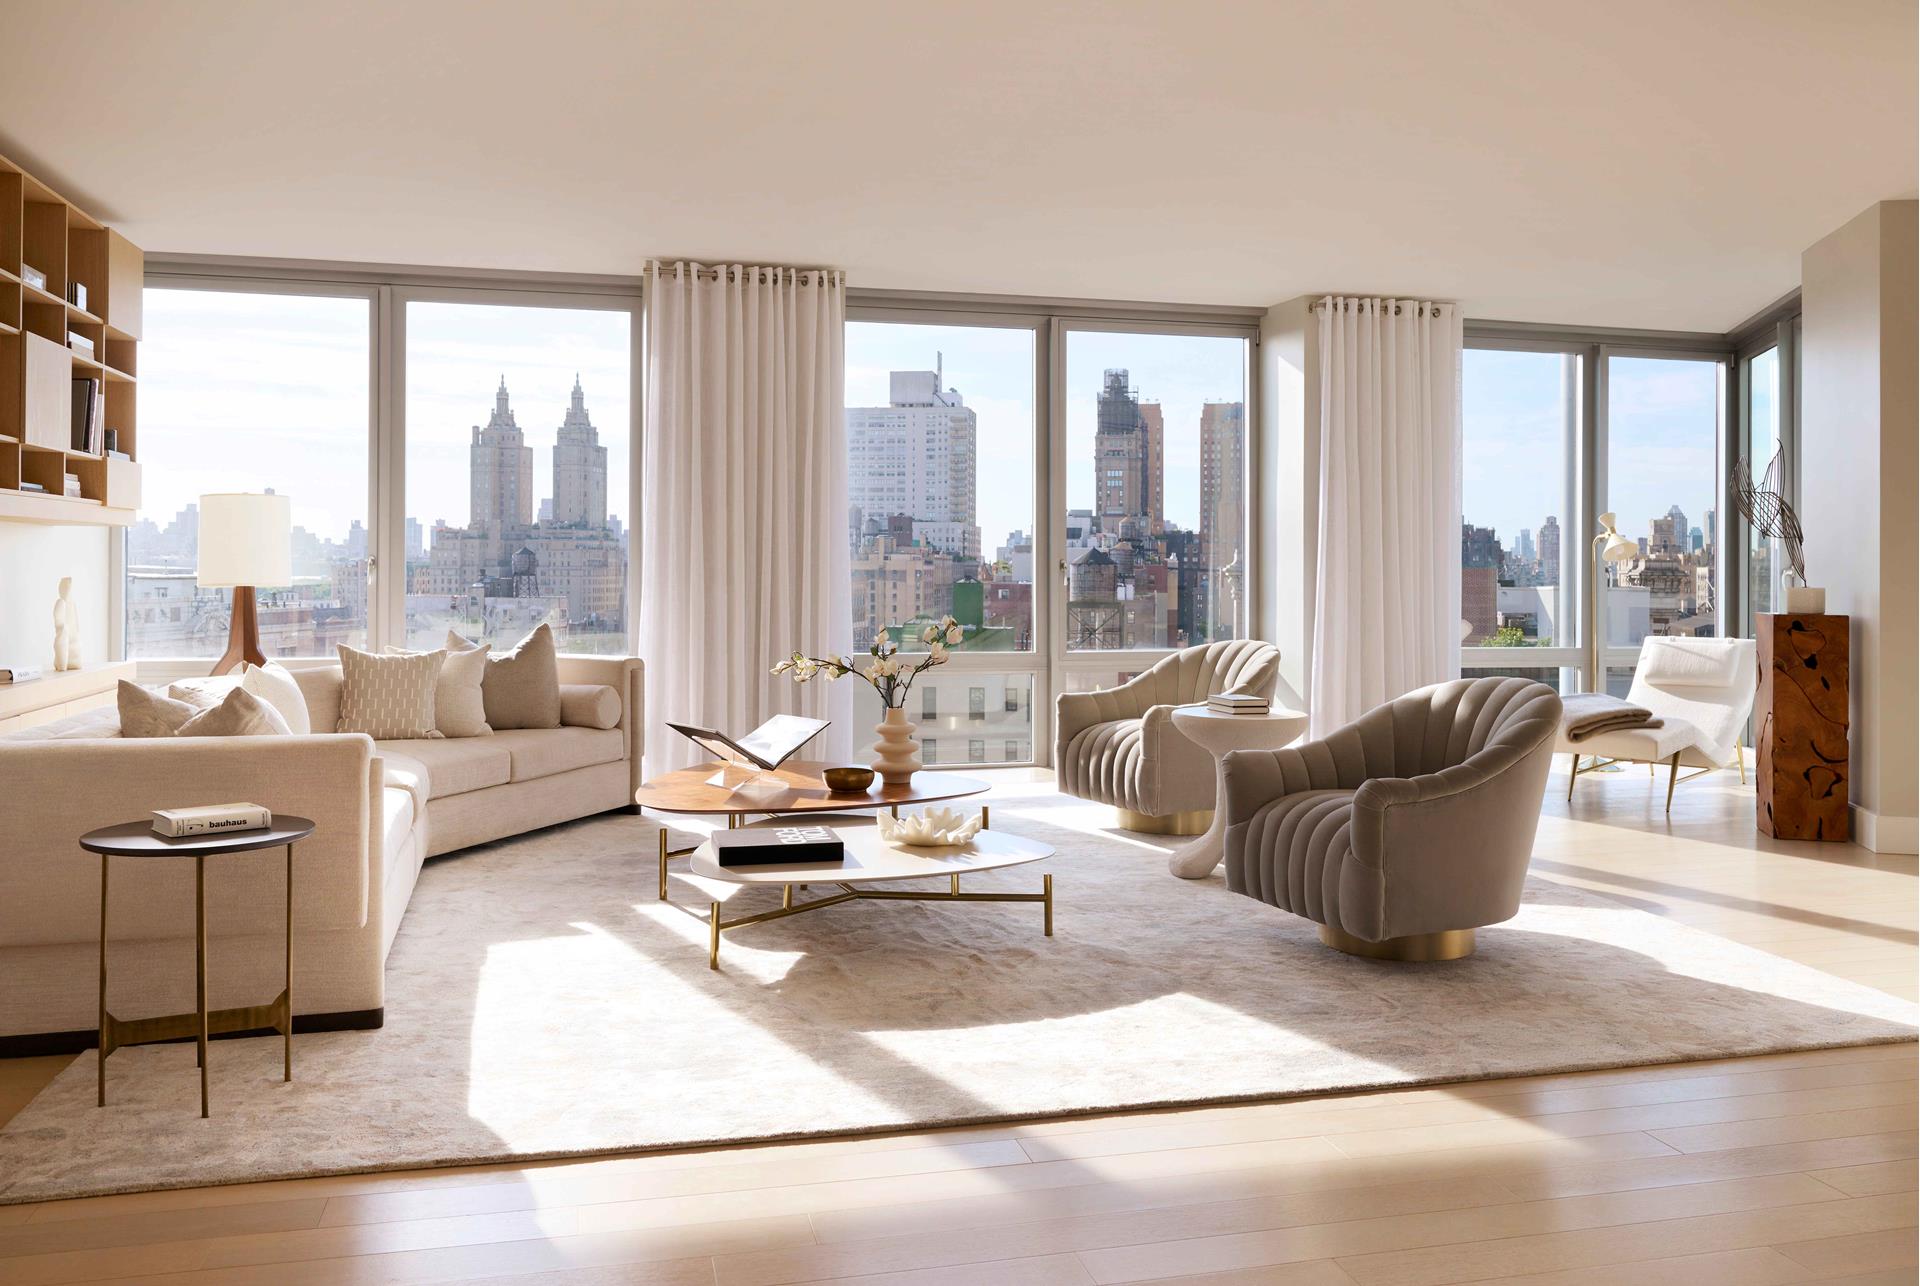 212 West 72nd Street 15G, Lincoln Sq, Upper West Side, NYC - 4 Bedrooms  
4.5 Bathrooms  
8 Rooms - 